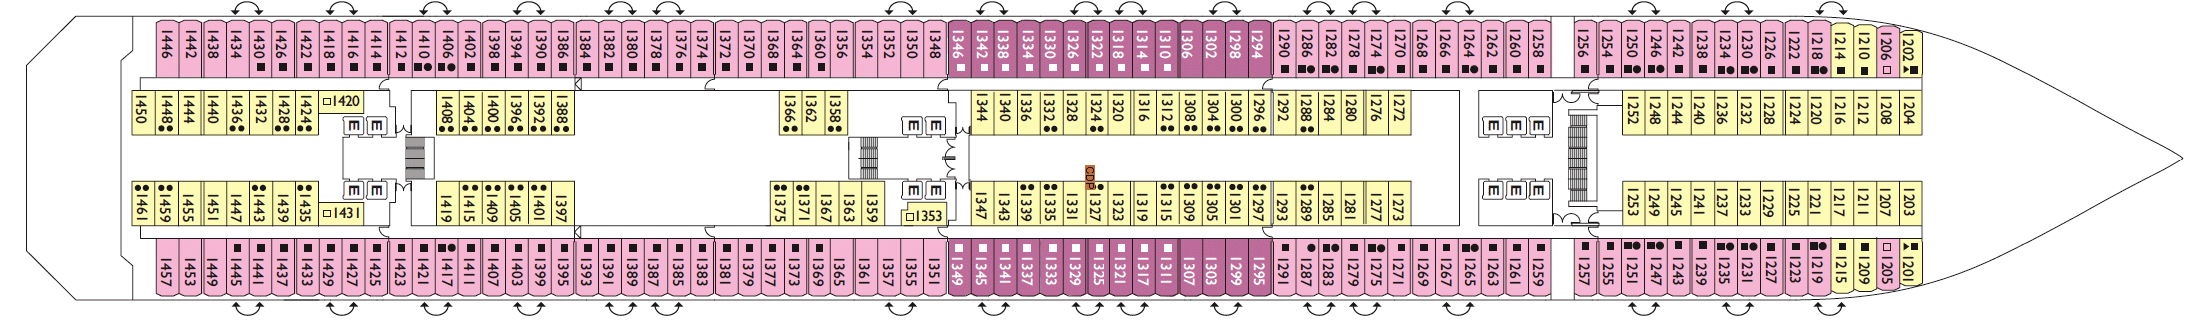 1548635952.8612_d186_Costa Cruises Costa Pacifica Deck Plans Notturno.png